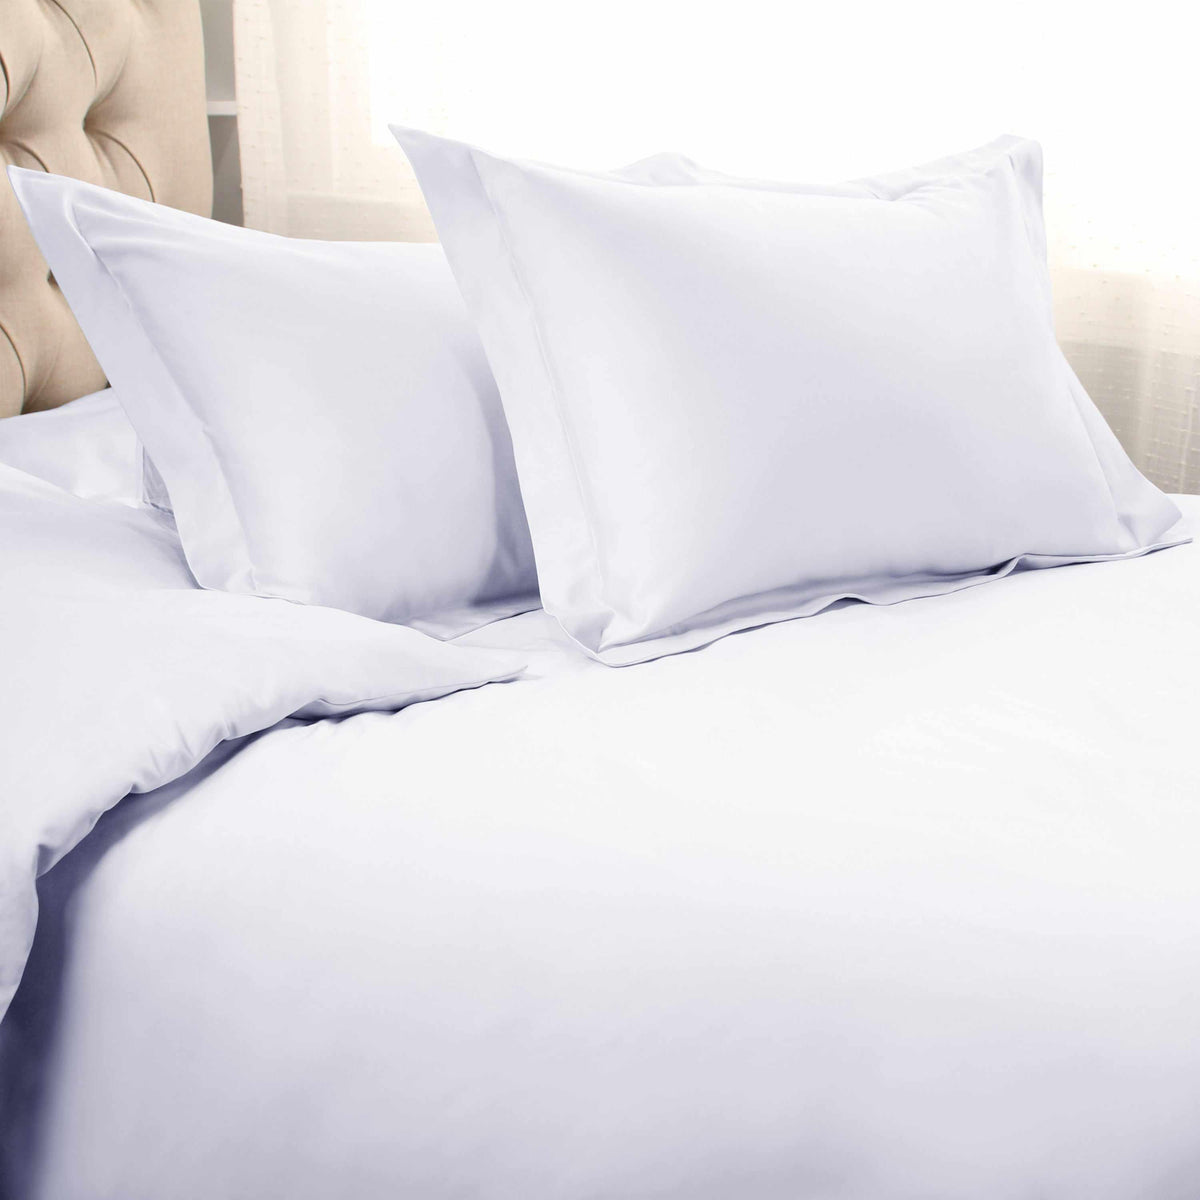  Superior Solid 1500 Thread Count Egyptian Cotton Duvet Cover Set - White'